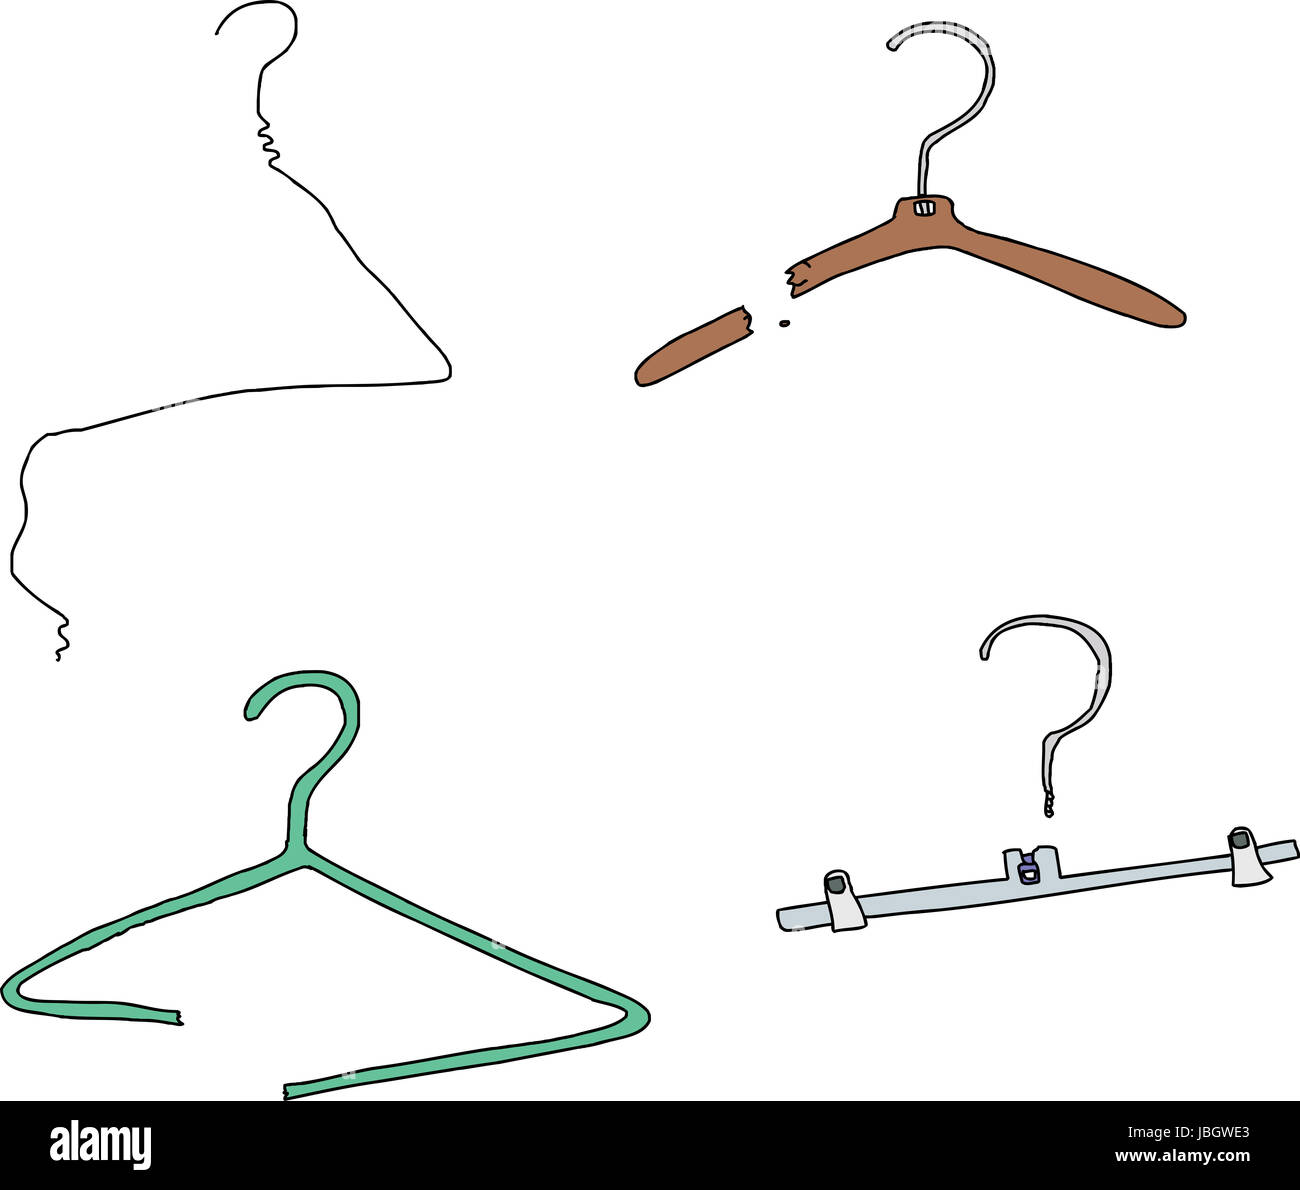 Broken clothes hangers over isolated white background Stock Photo